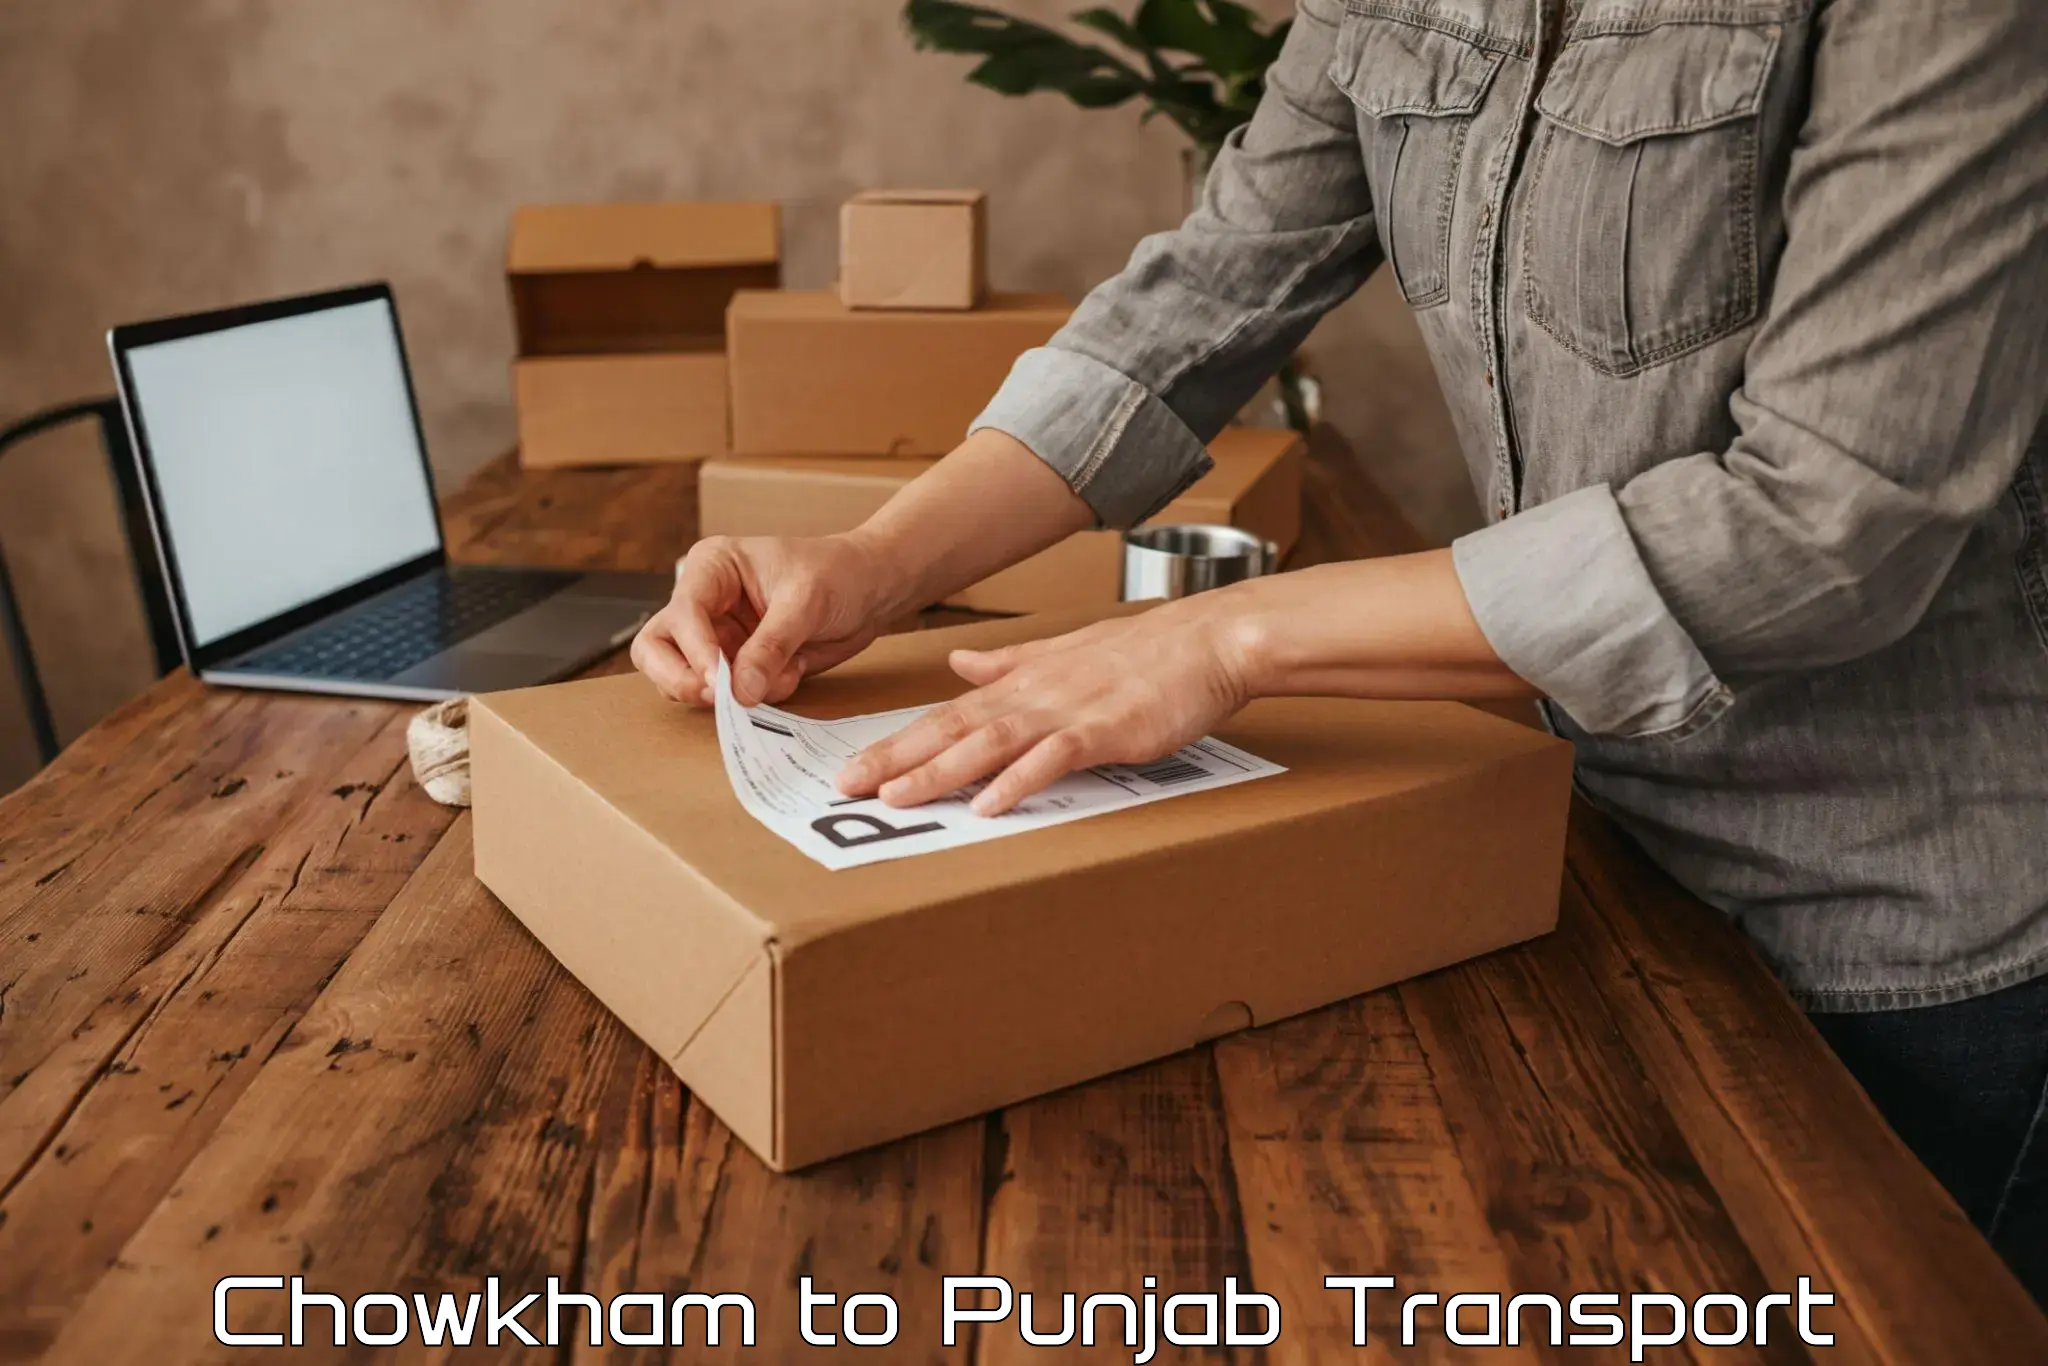 Domestic goods transportation services Chowkham to Sirhind Fatehgarh